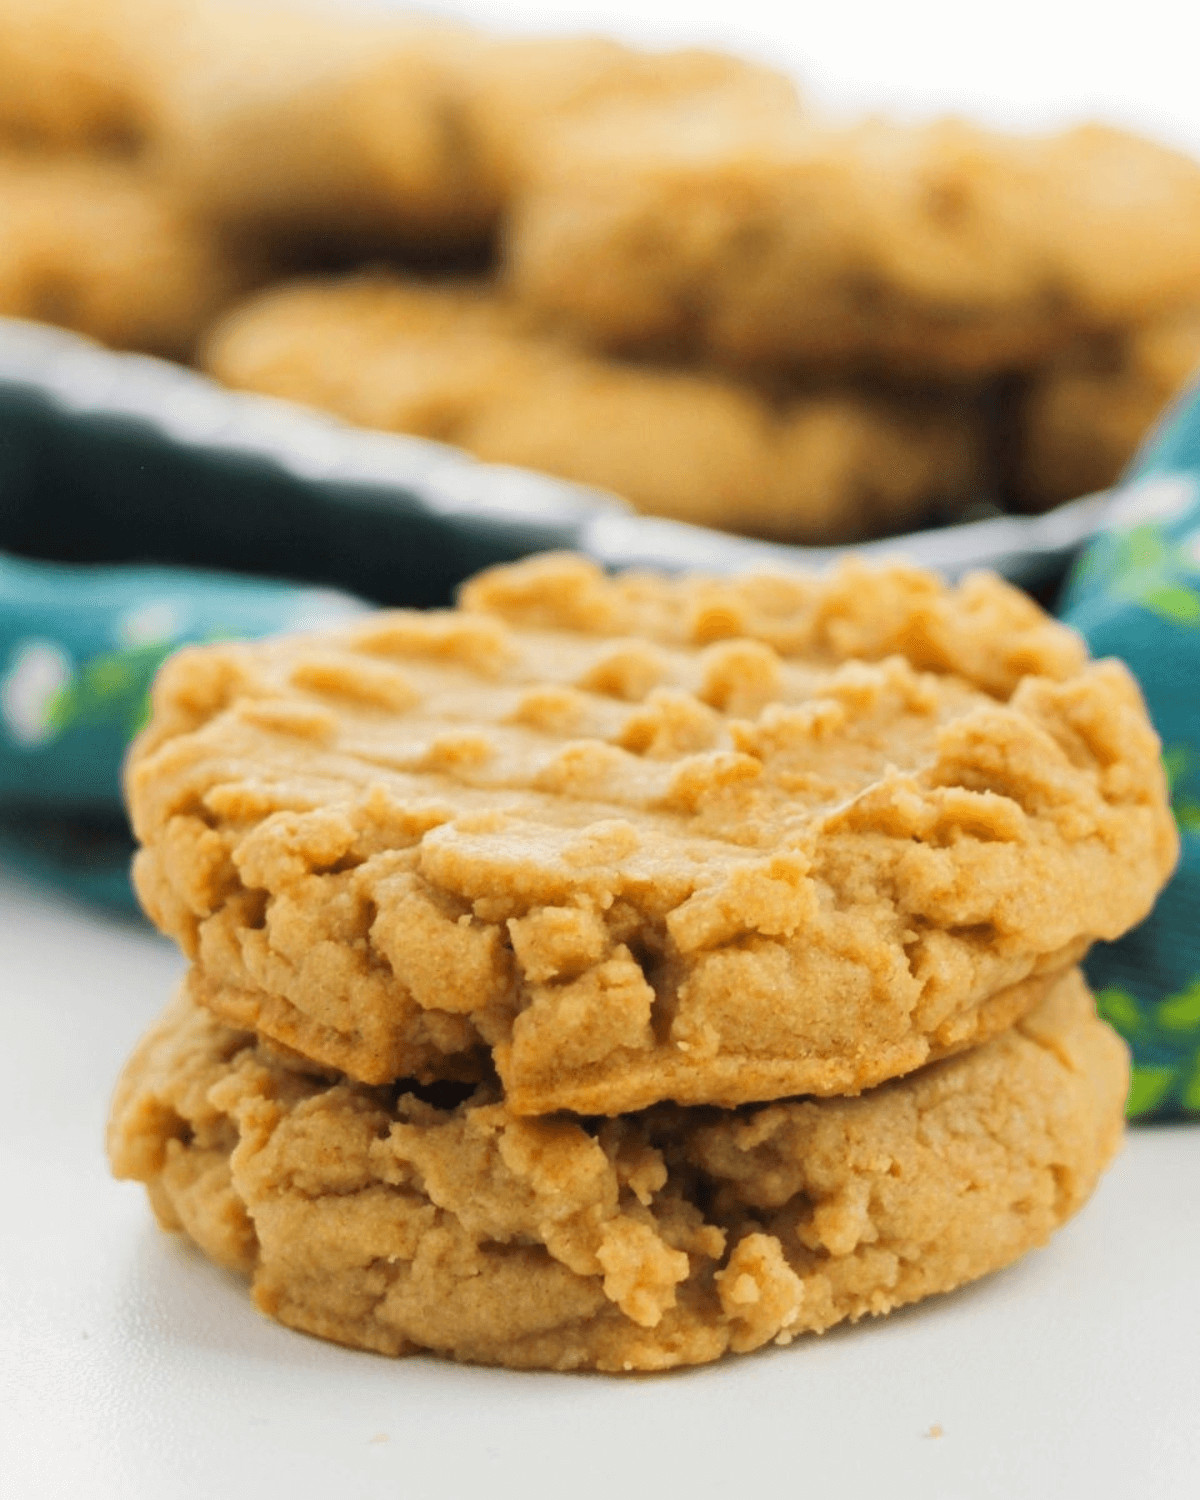 A stack of the jif peanut butter cookies.